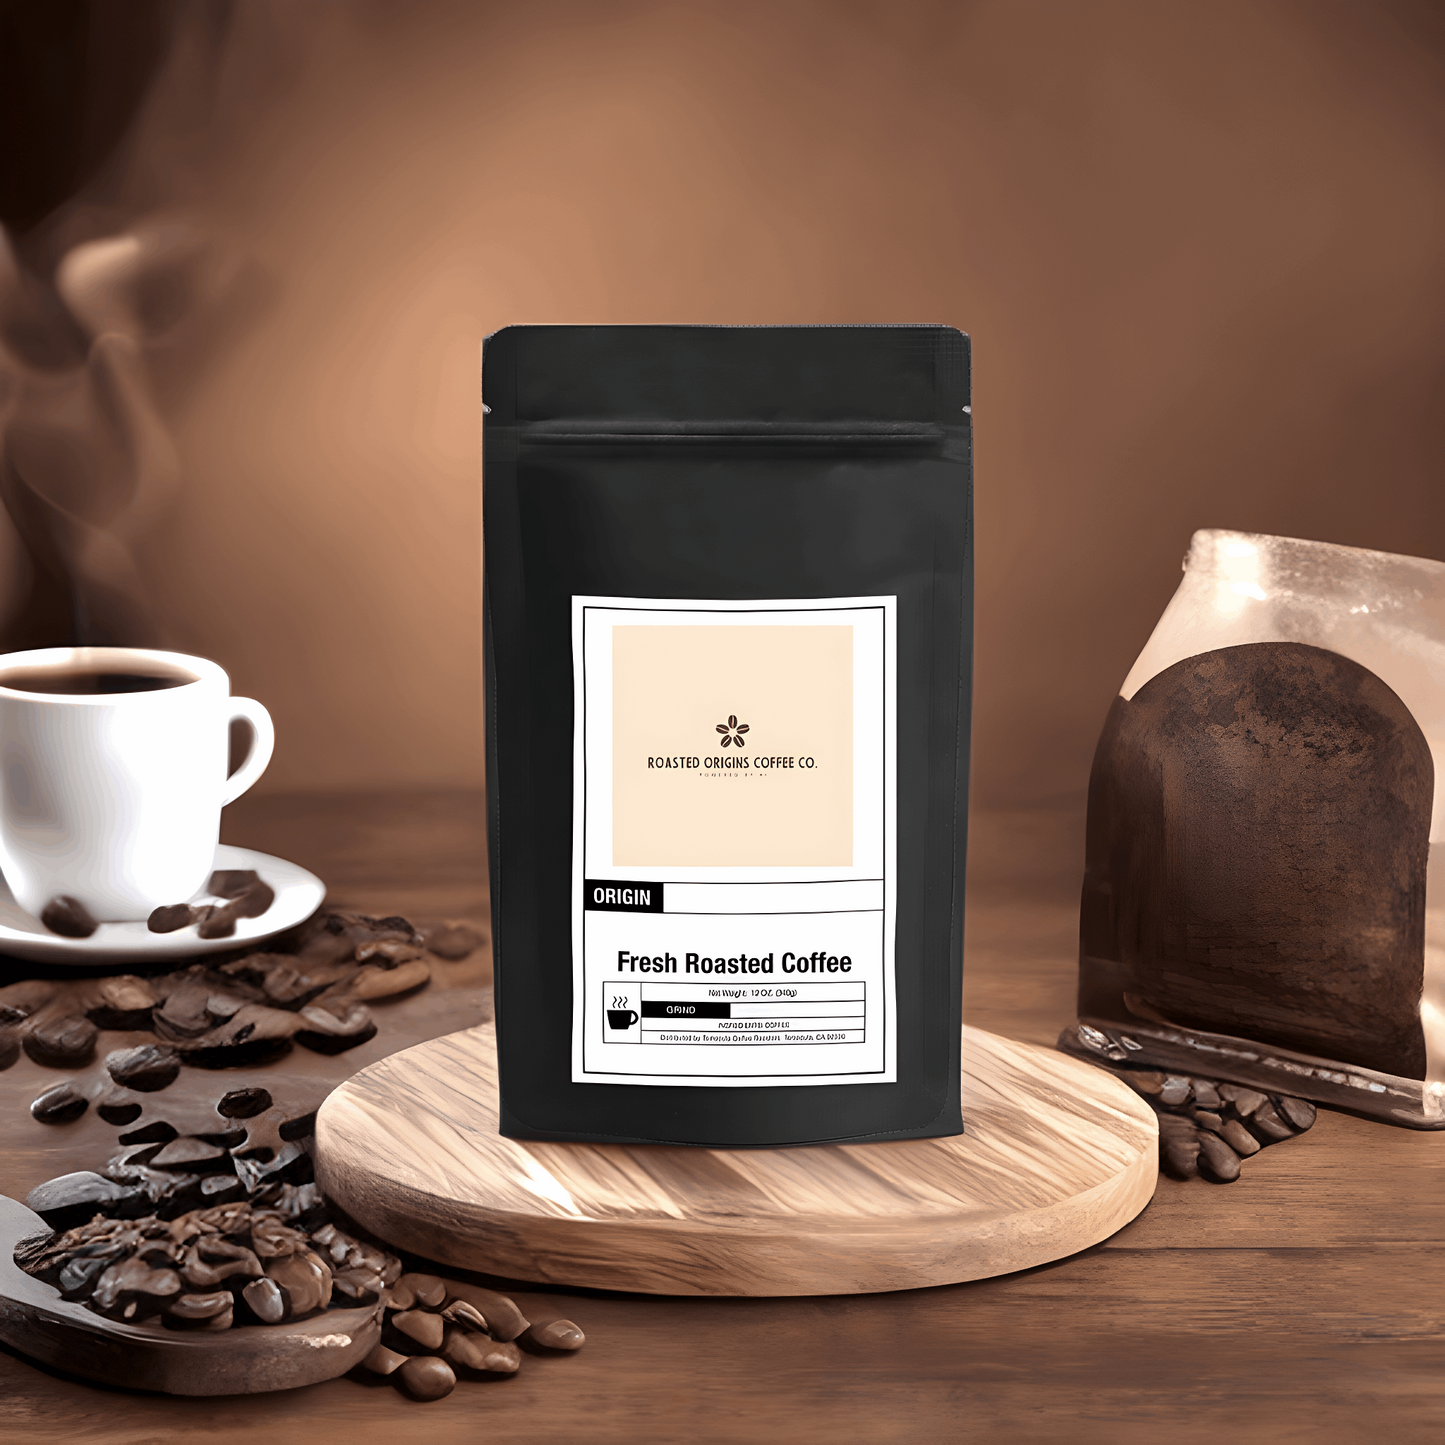 a bag of Mocha flavored coffee made by roasted origins next to coffee beans sitting on a pedestal